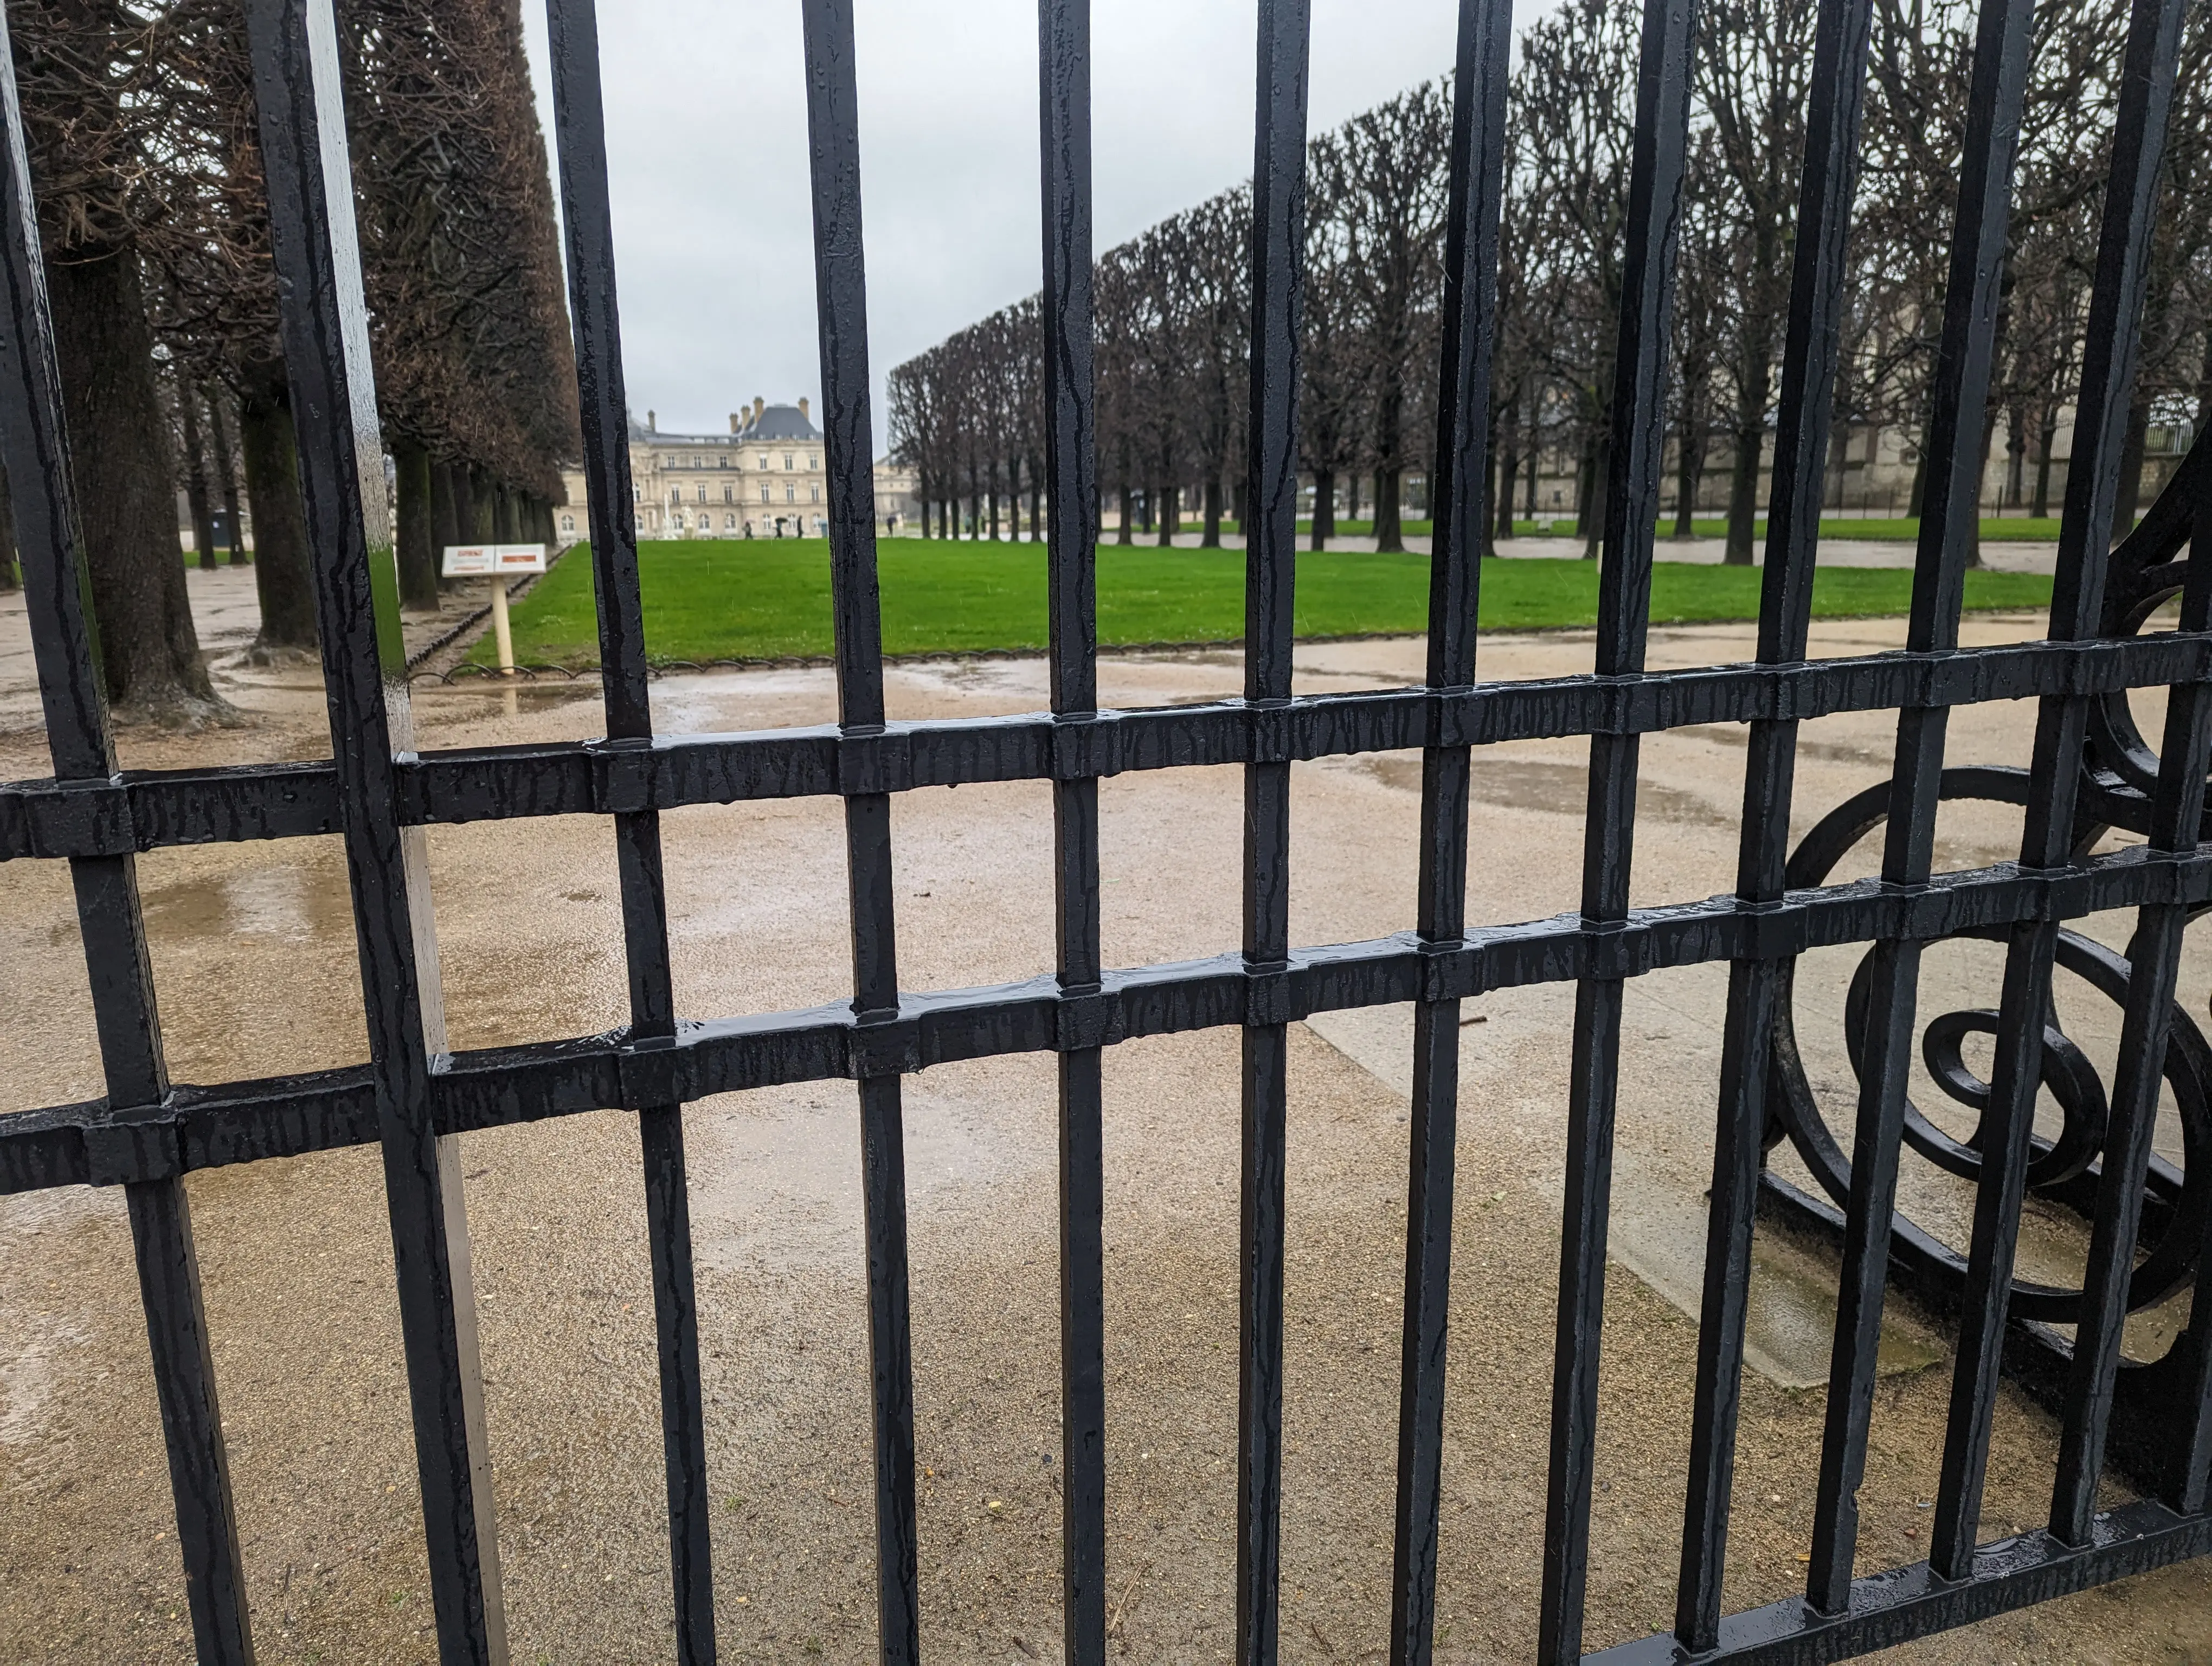 The Luxembourg Gardens, where the album cover for Tame Impala’s Lonerism was taken